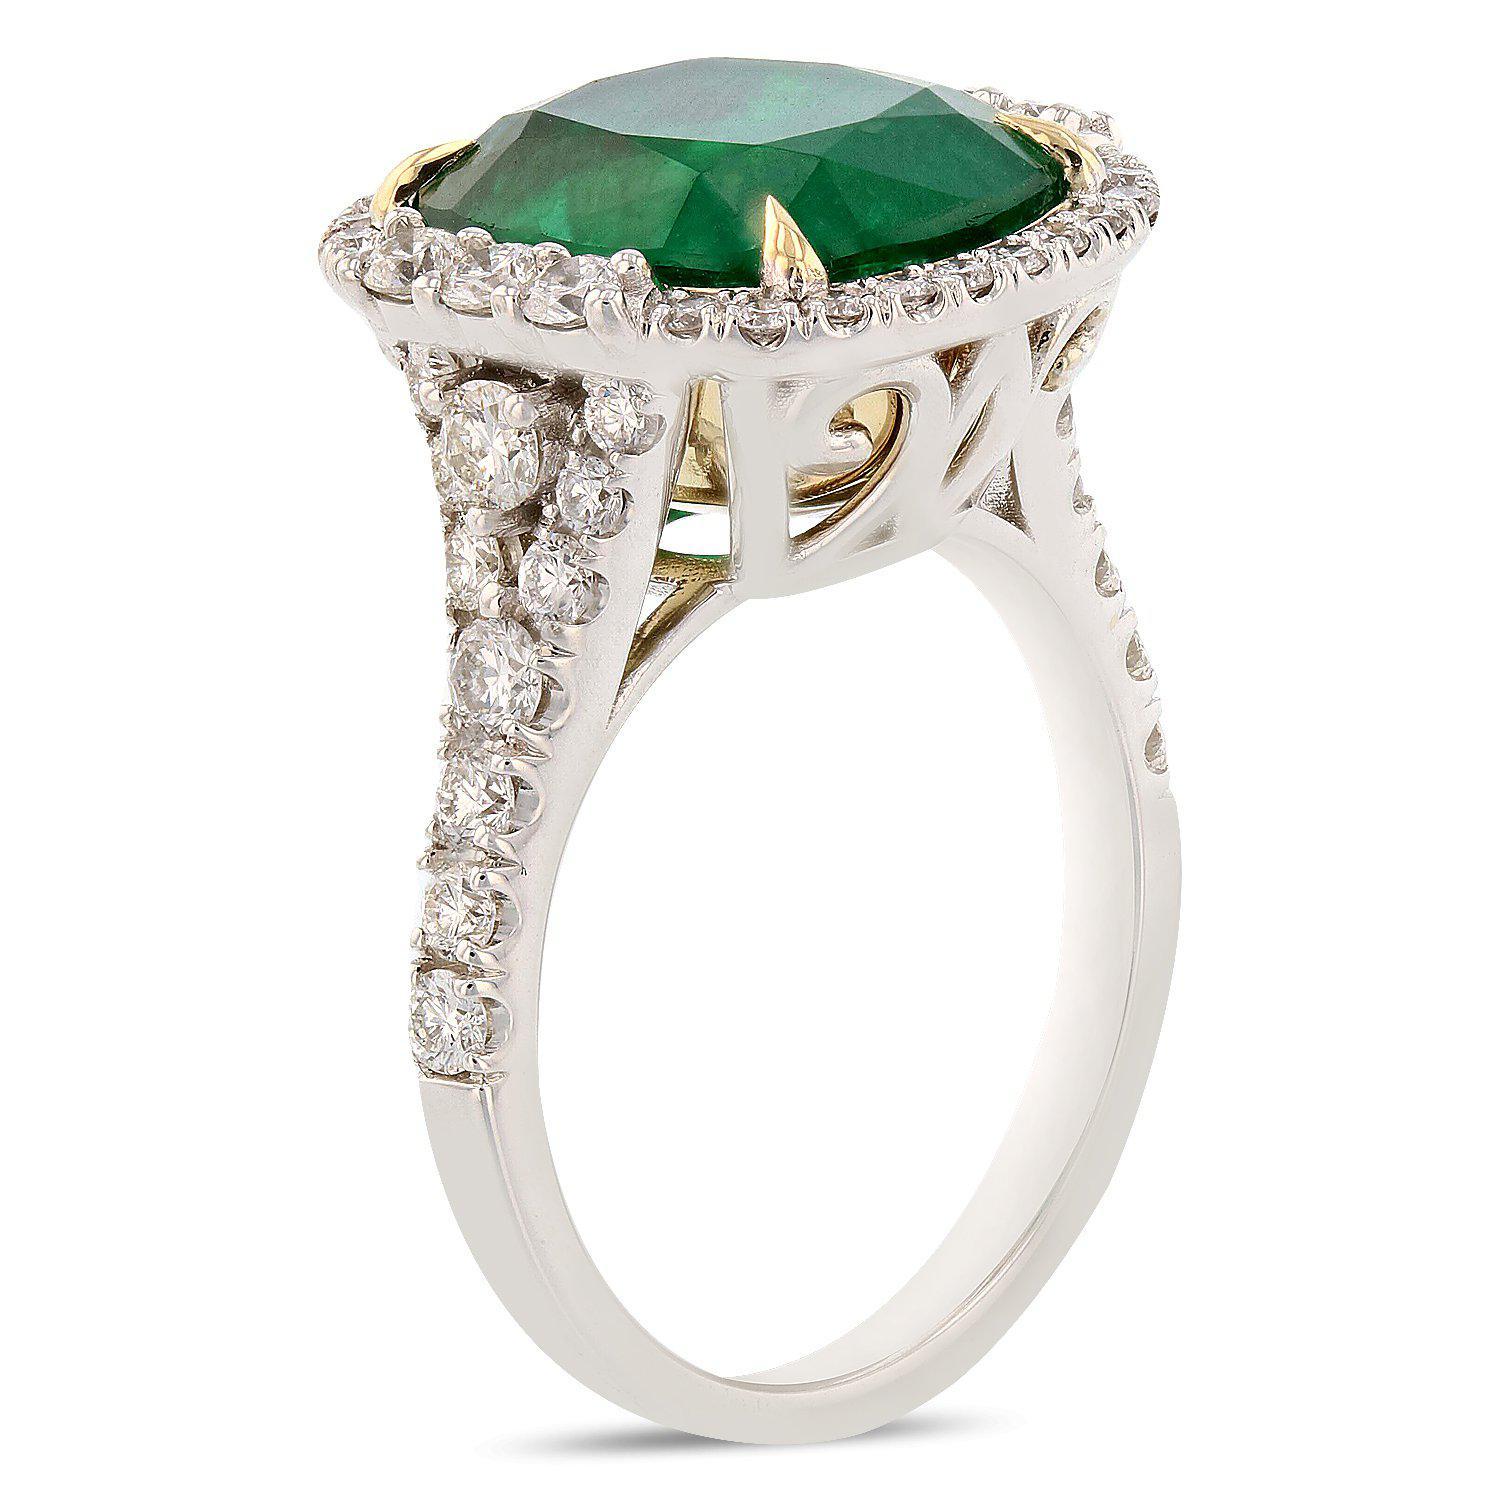 One electronically tested 18KT white gold ladies cast and assembled emerald and diamond ring with a bright finish. Condition is new, good workmanship.

 

The featured emerald is set in a yellow gold basket within a diamond bezel, supported by an